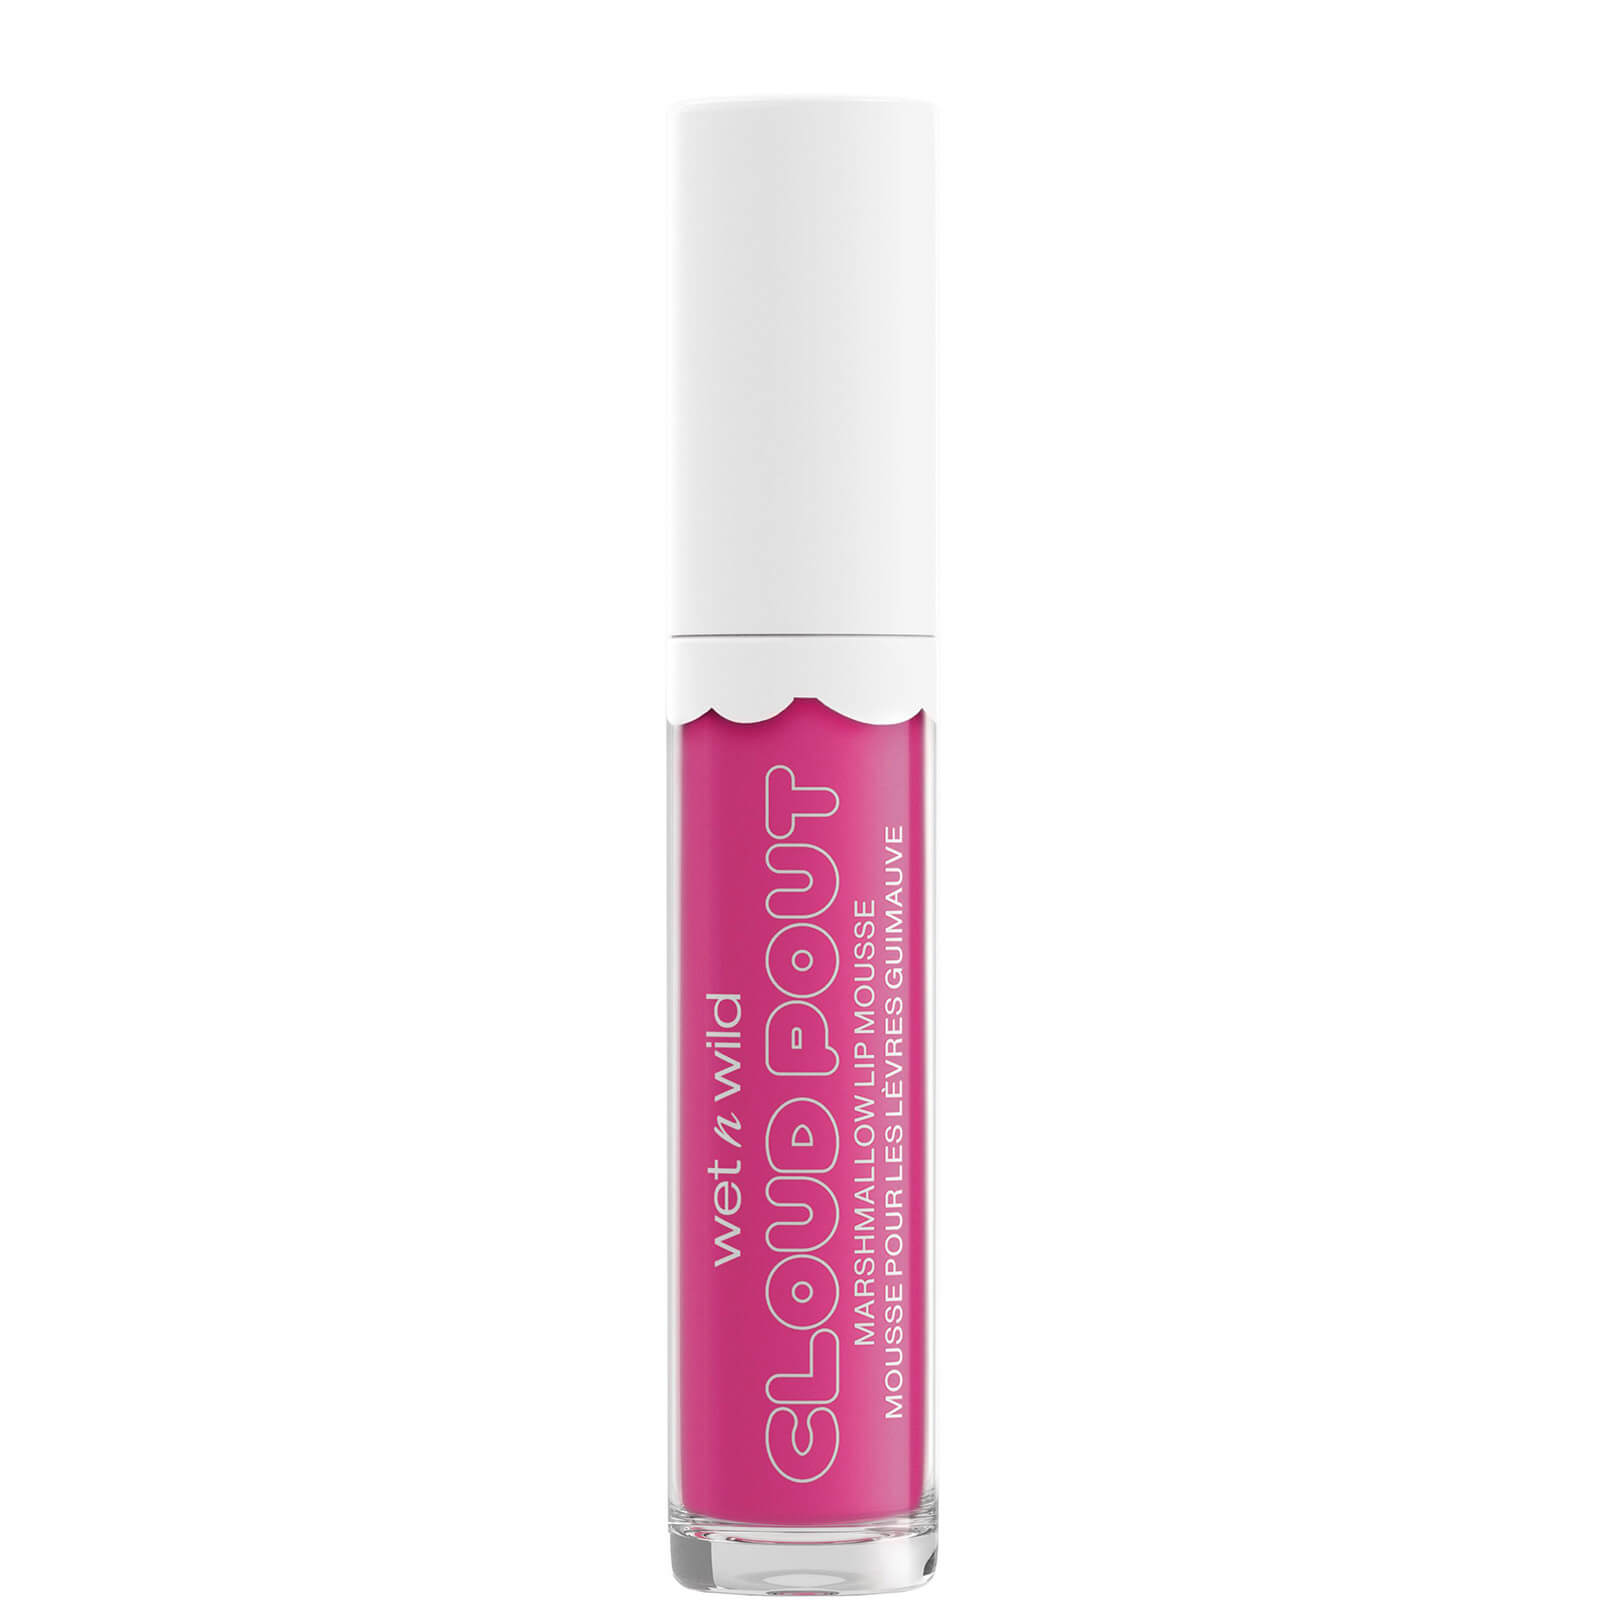 wet n wild Cloud Pout Marshmellow Lip Mousse 3ml (Various Shades) - Candy Wasted